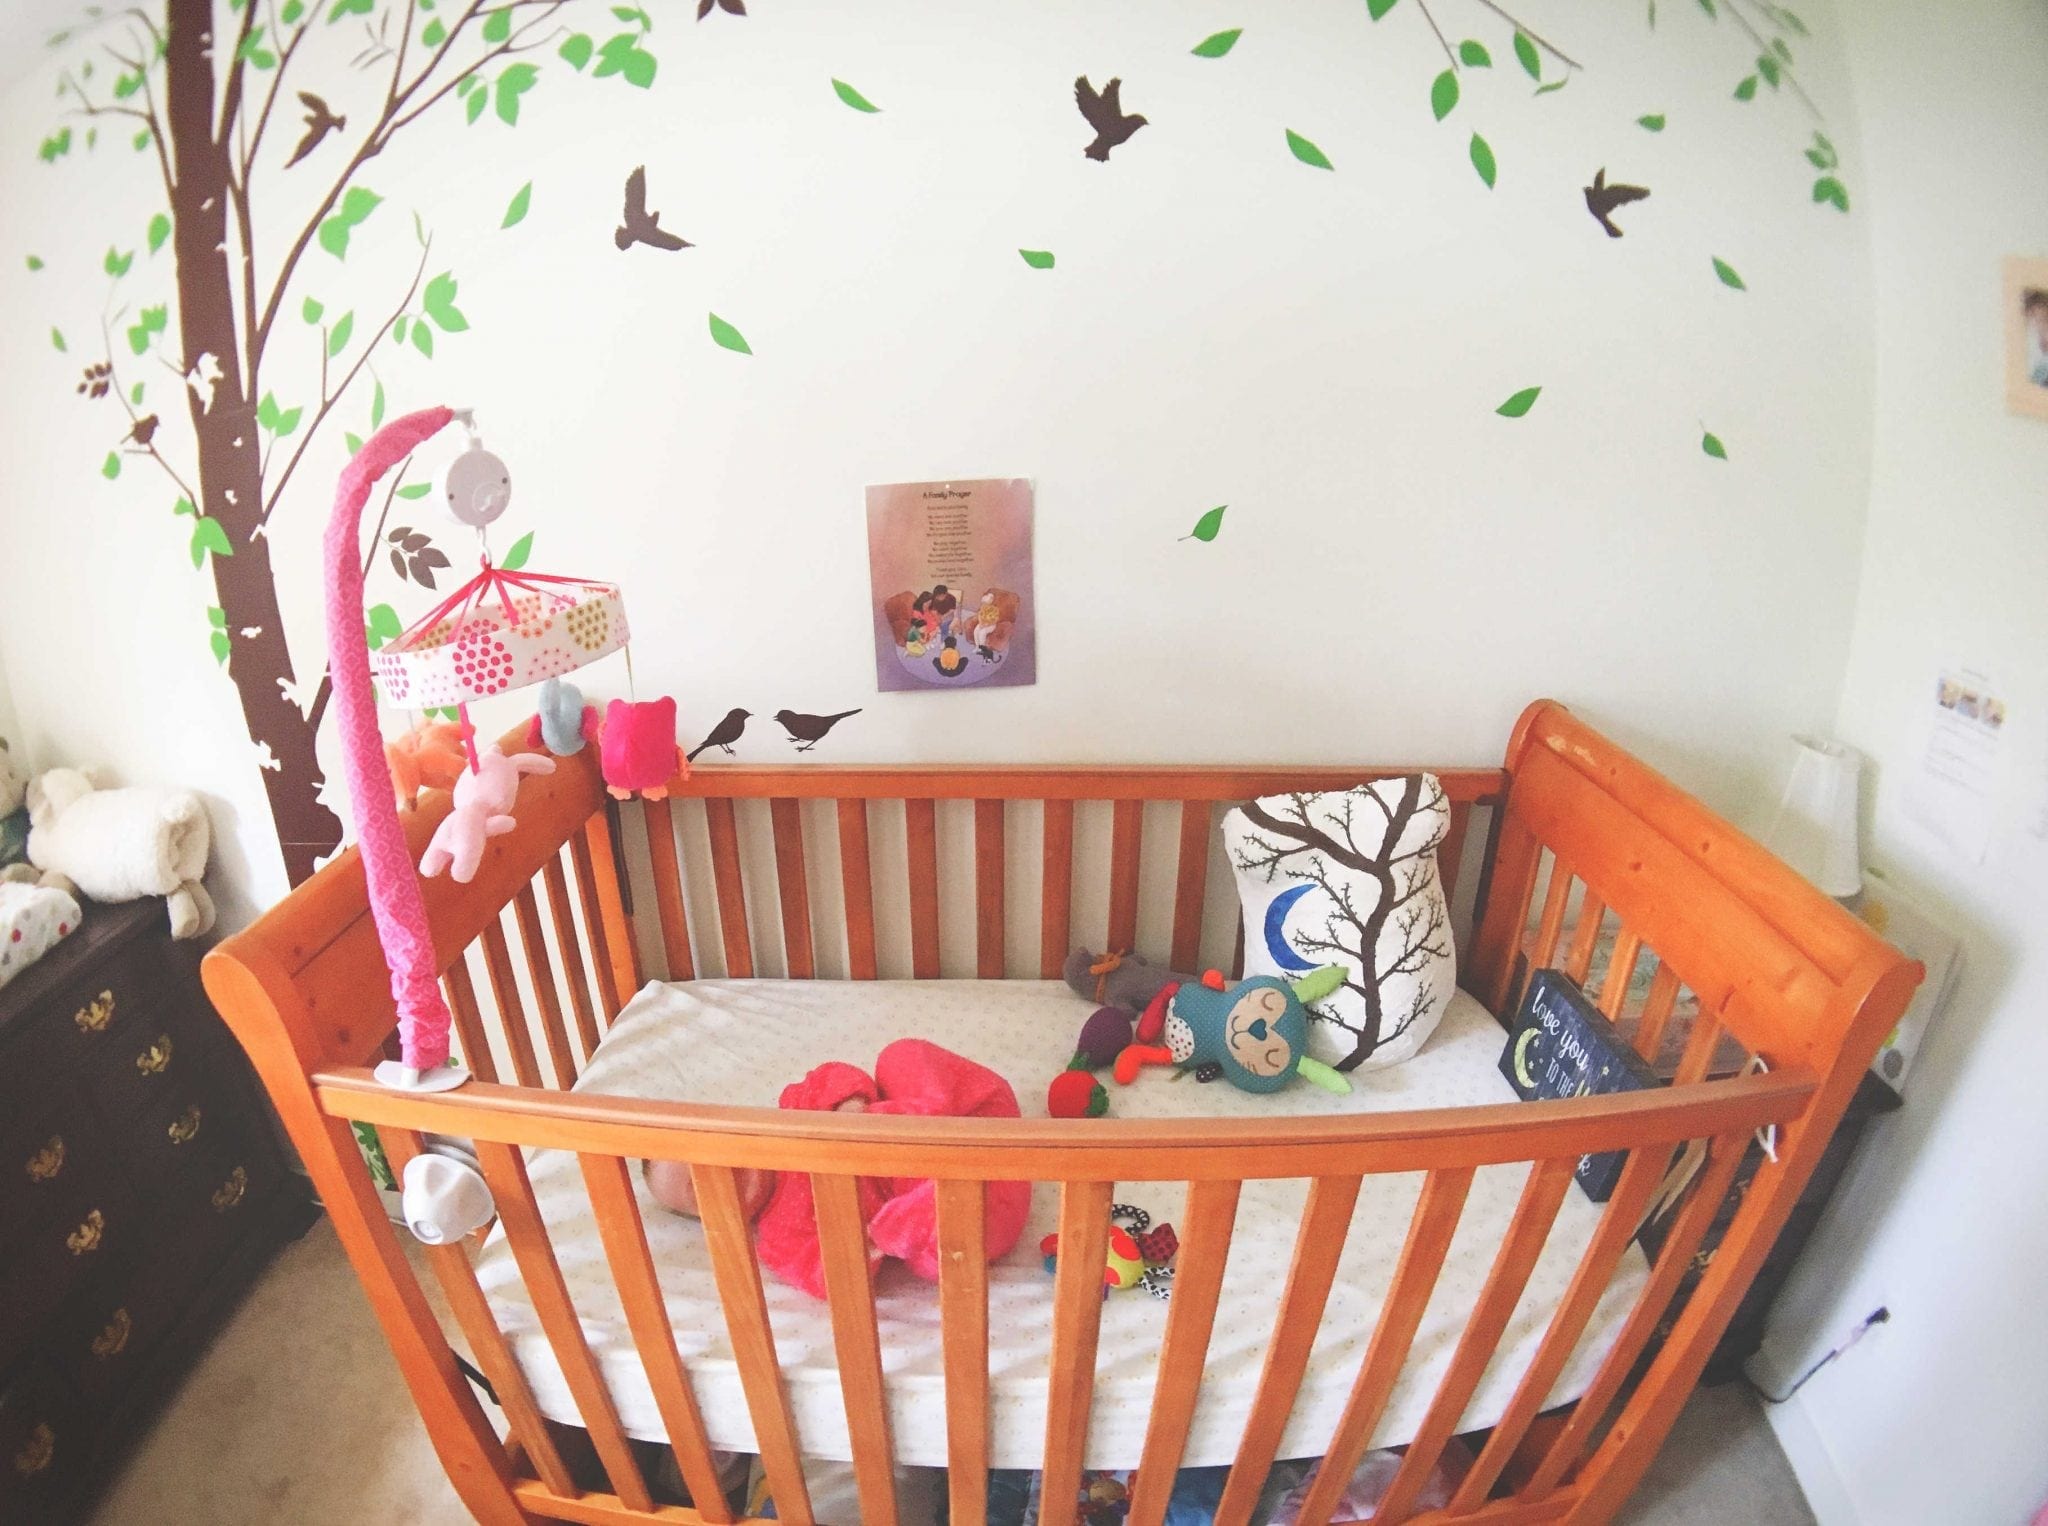 Luna's Secondhand Crib & Dressers - usually big ticket items